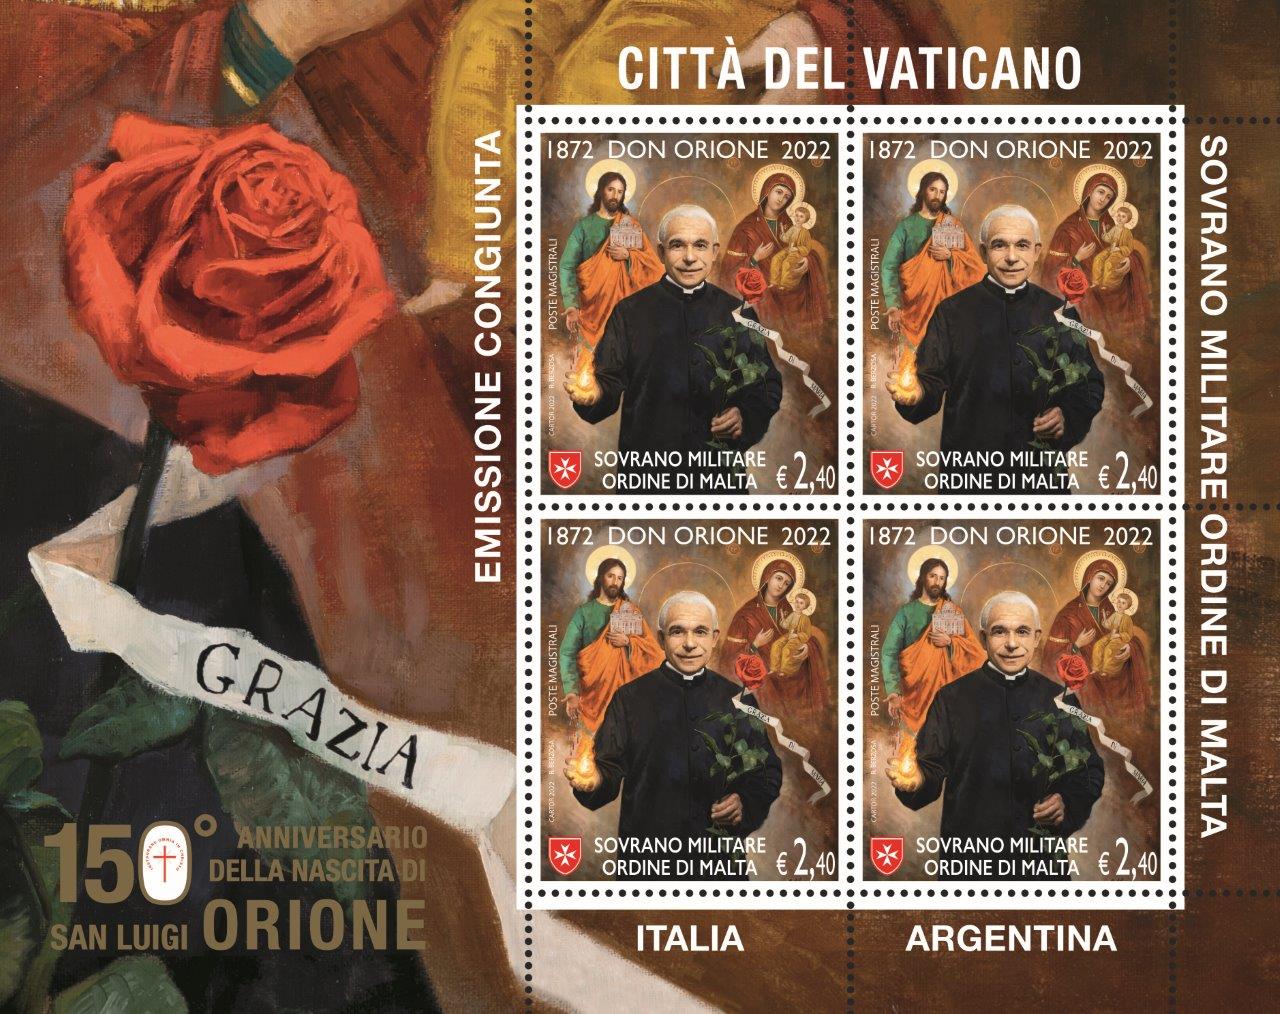 New postal issue – “St. Luigi Orione, on the 150th anniversary of his birth”